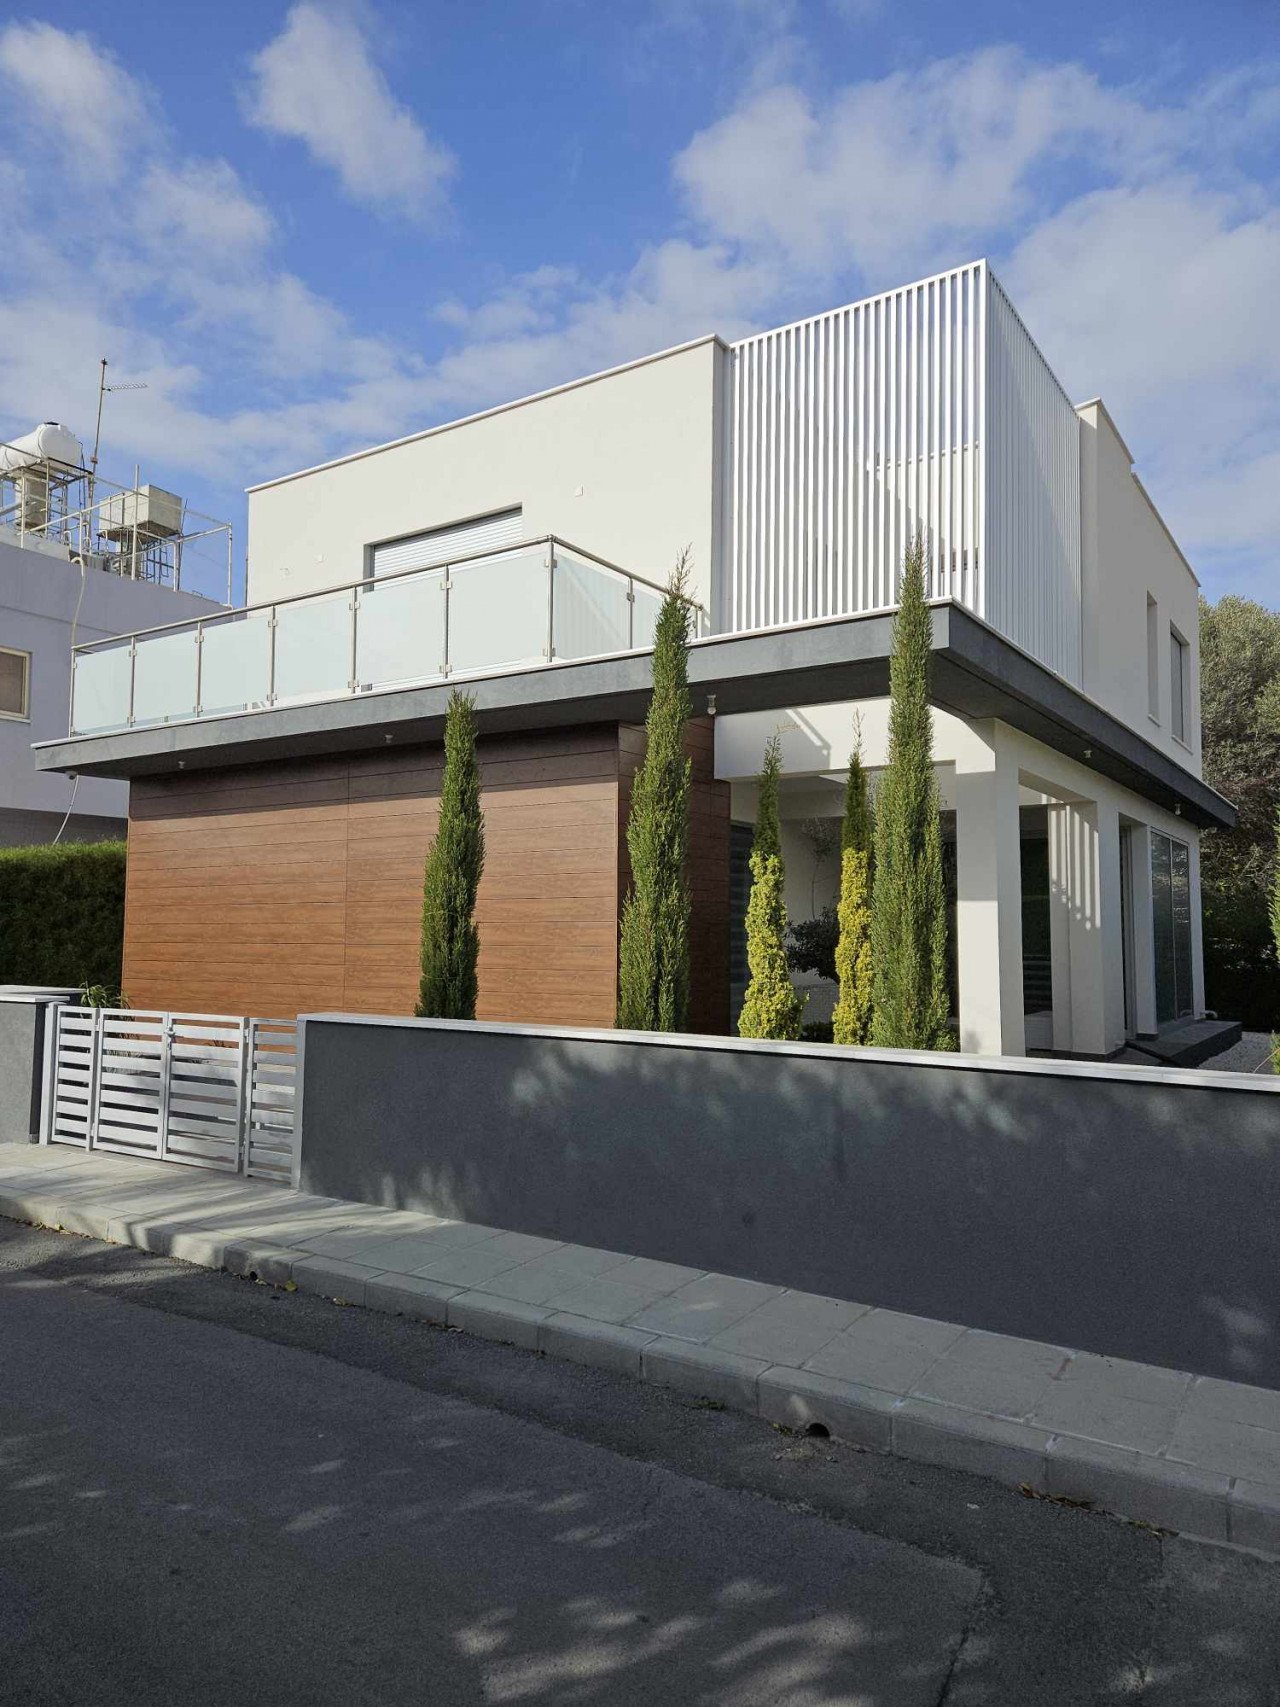 Property for Sale: House (Detached) in Agios Antonis, Limassol  | Key Realtor Cyprus